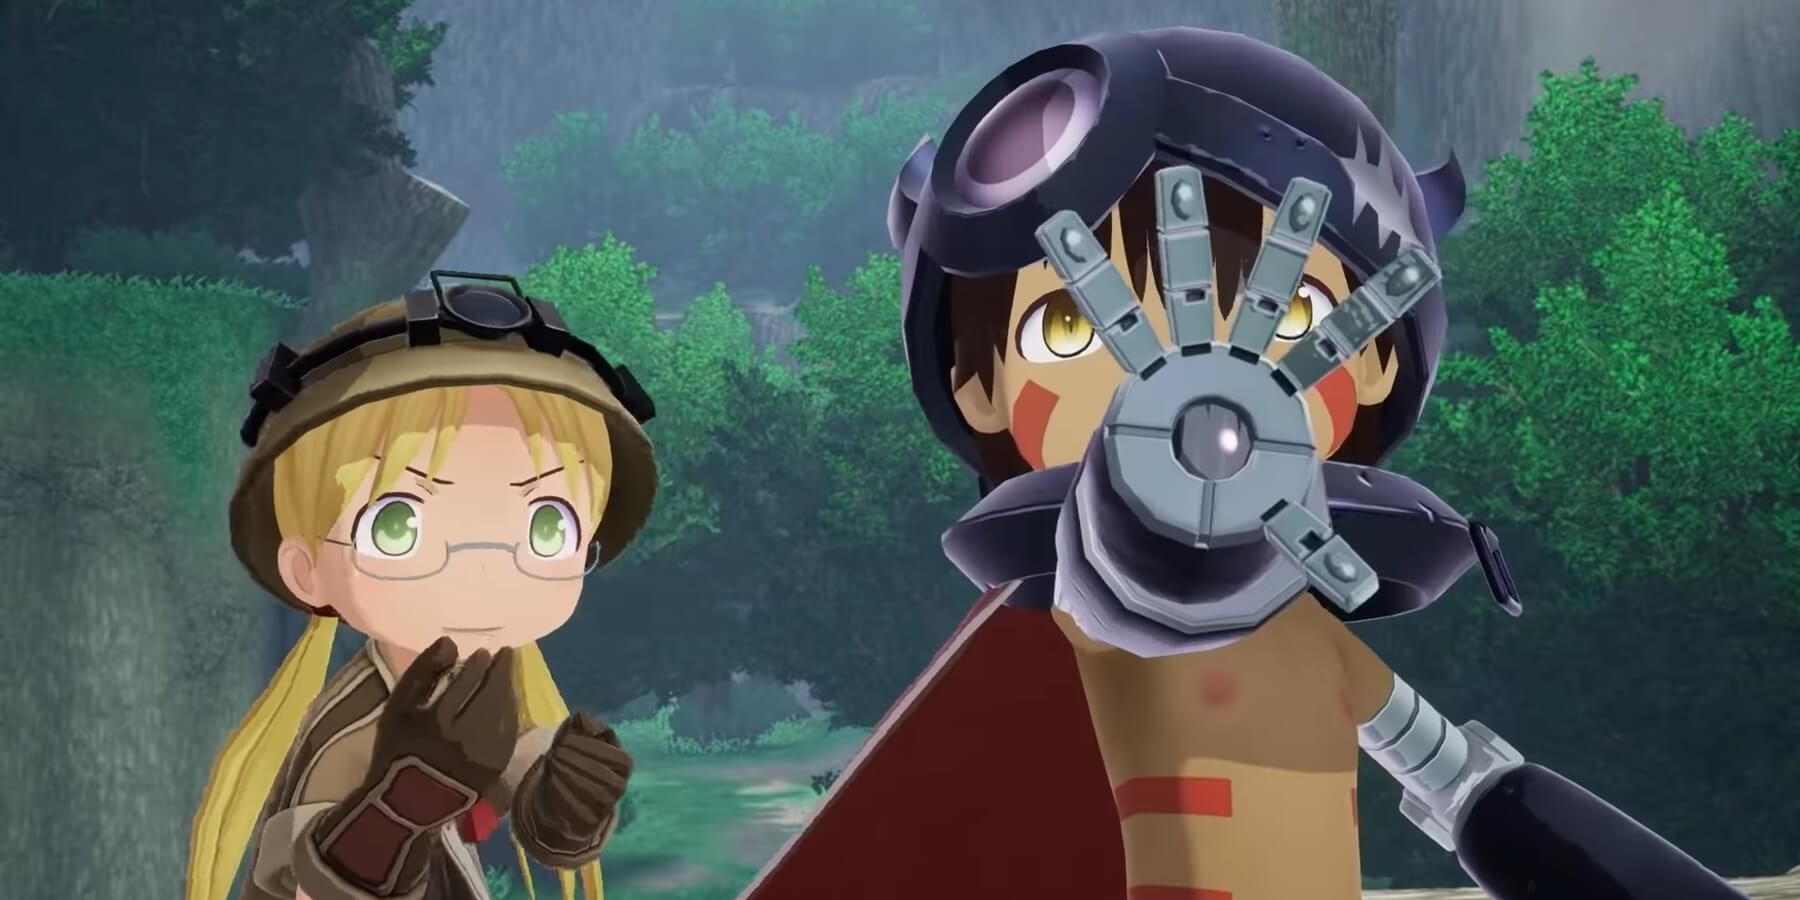 Made in Abyss Reveals Season 2 English Dub Release Date